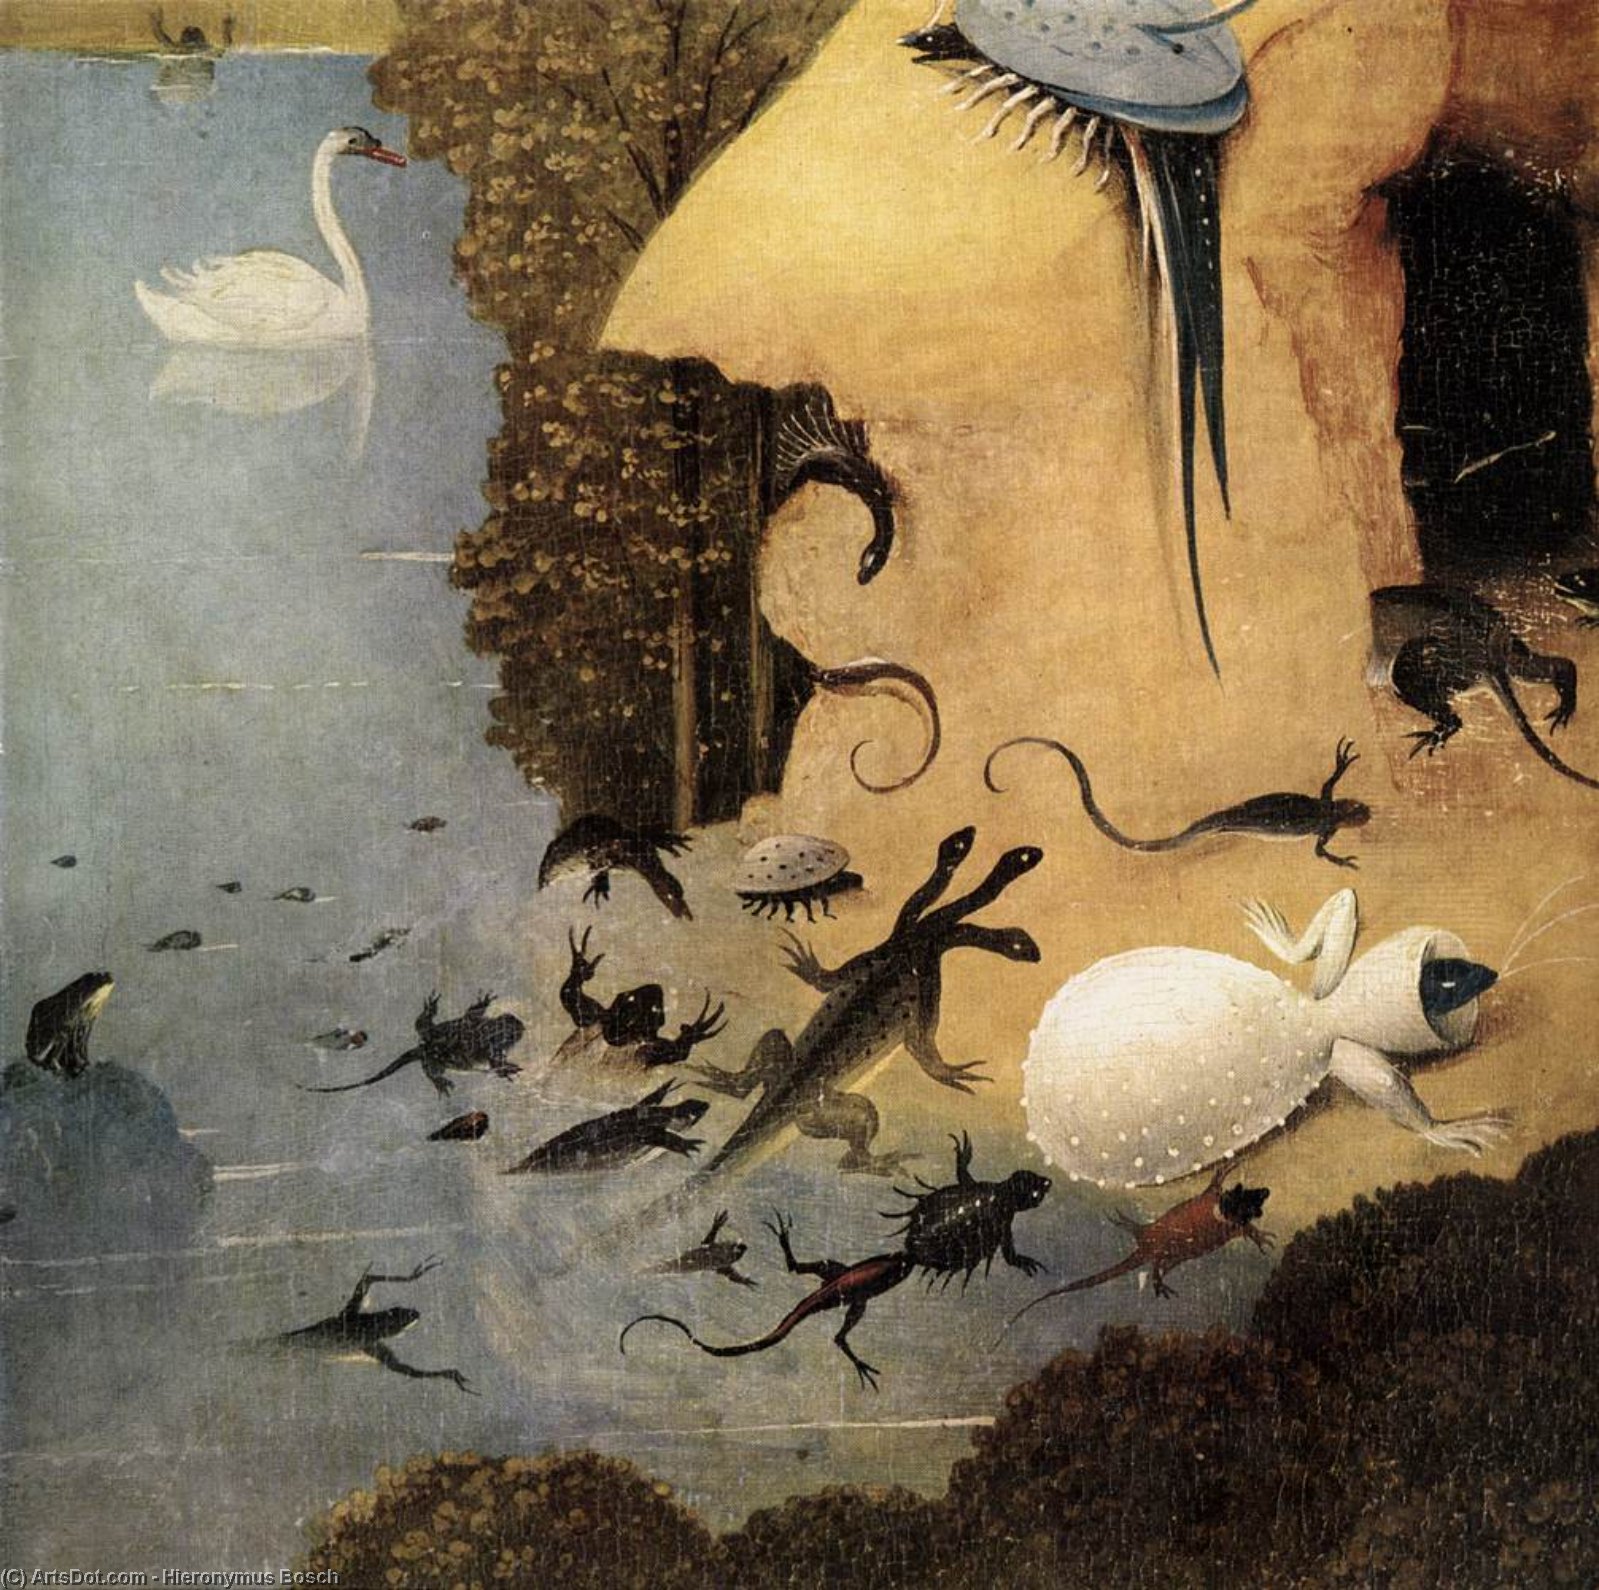 WikiOO.org - Encyclopedia of Fine Arts - Malba, Artwork Hieronymus Bosch - Triptych of Garden of Earthly Delights (detail) (13)